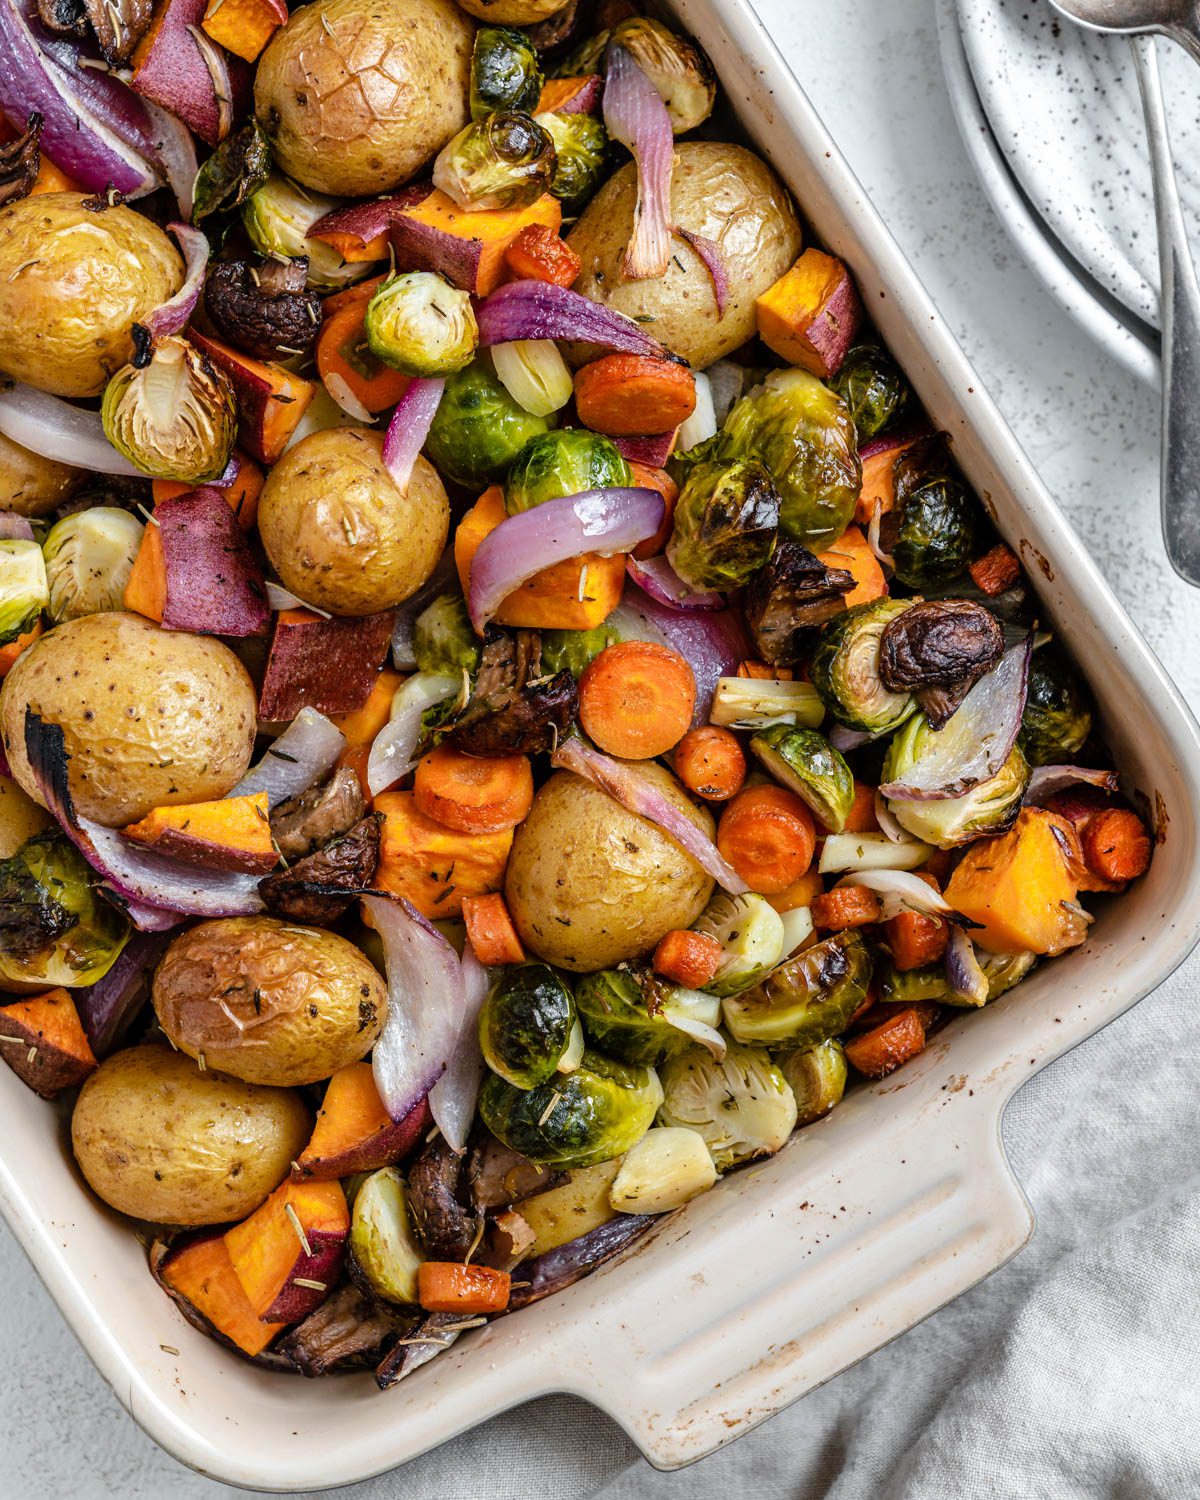 completed Roasted Vegetables in a baking dish against a light surface